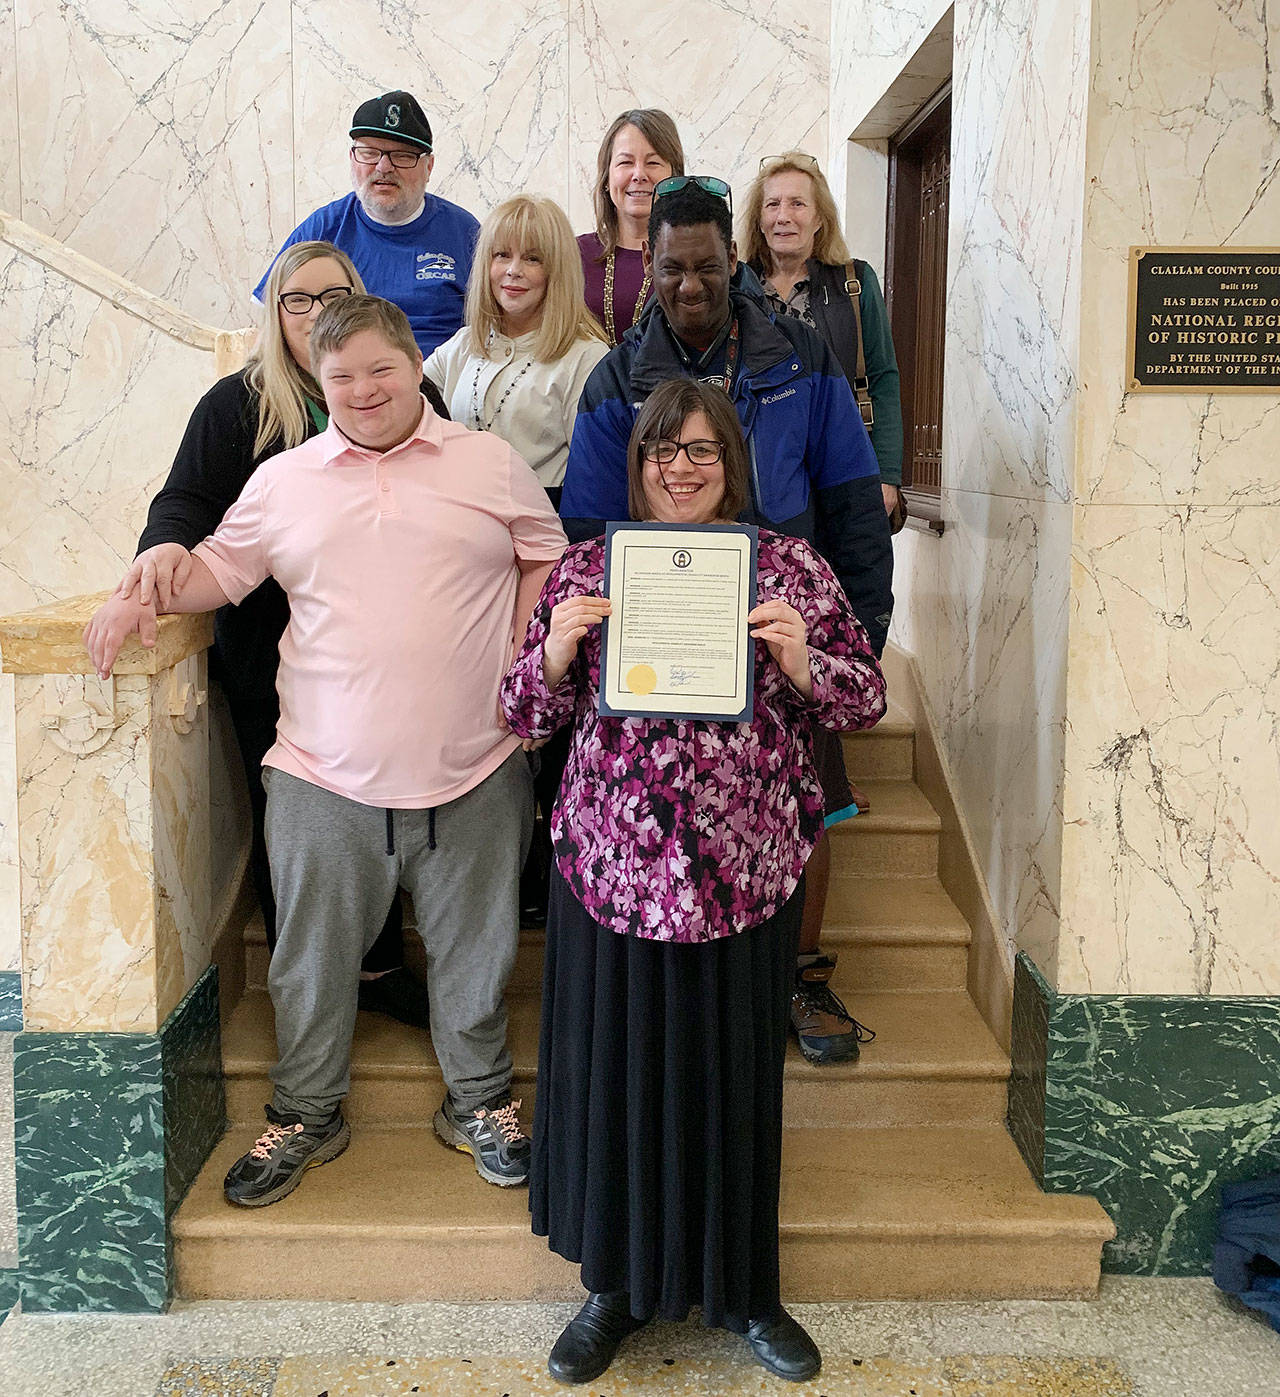 Celebrating Developmental Disabilities Awareness Month are (back row, from left) Patrick McFarland, Virginia O’Neil and Karen Pierce, (middle row, from left) Shawnda Hicks, Kelley Lawrence and Tony Andrus, and (in front, from left) Grayson Hicks and Riley O’Neil. Photo by Chelsea Lierly